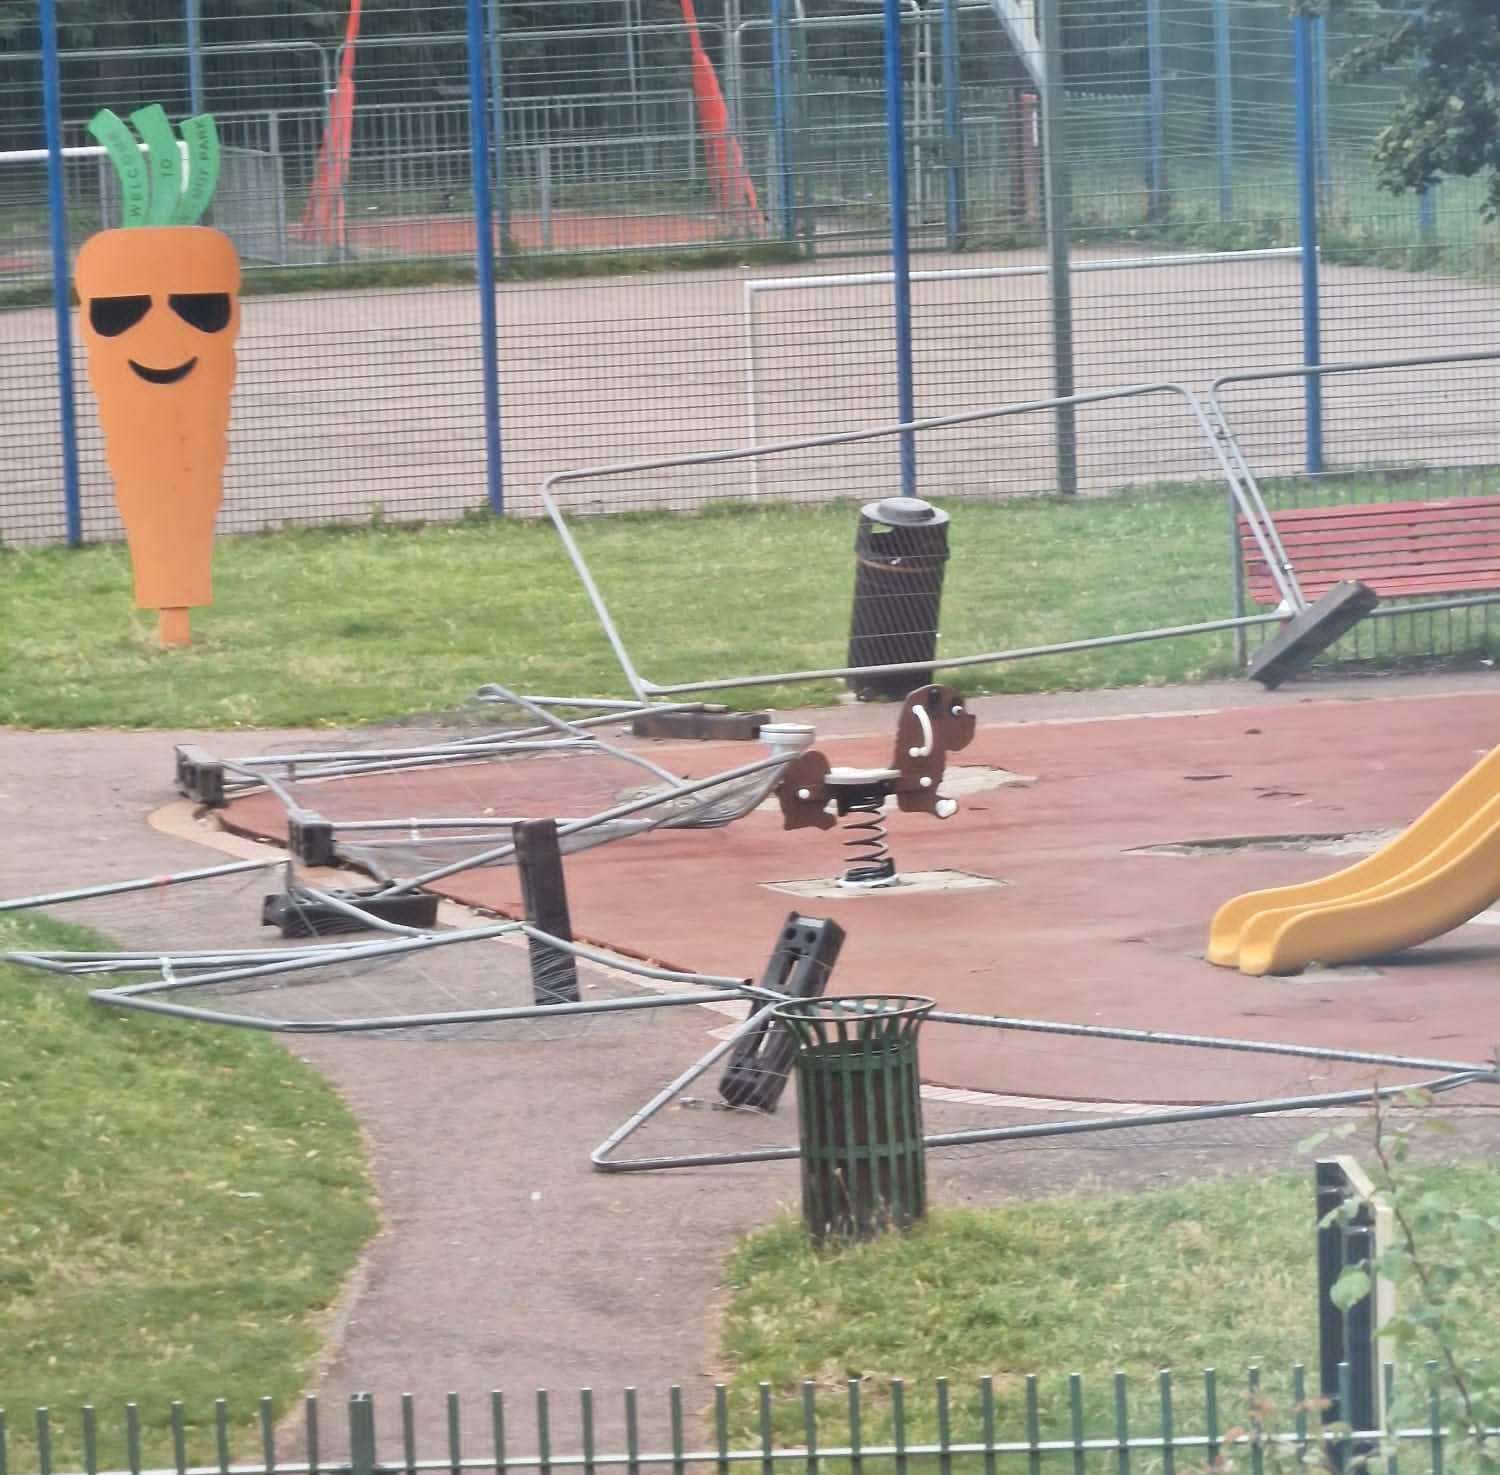 The playground is being targeted by gangs, say residents